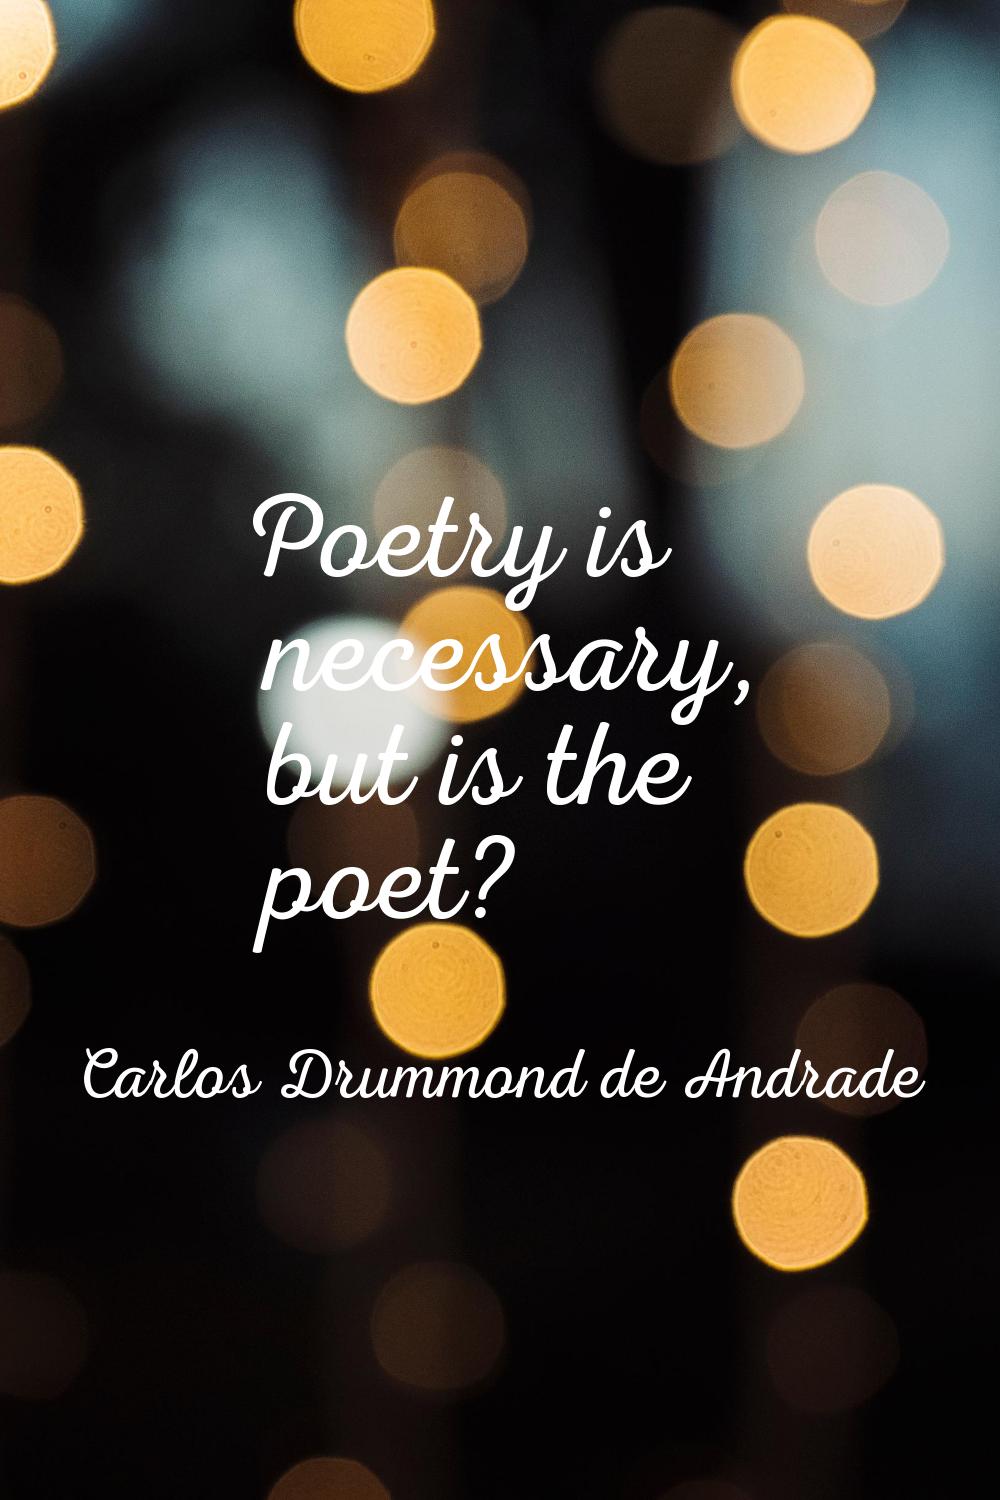 Poetry is necessary, but is the poet?